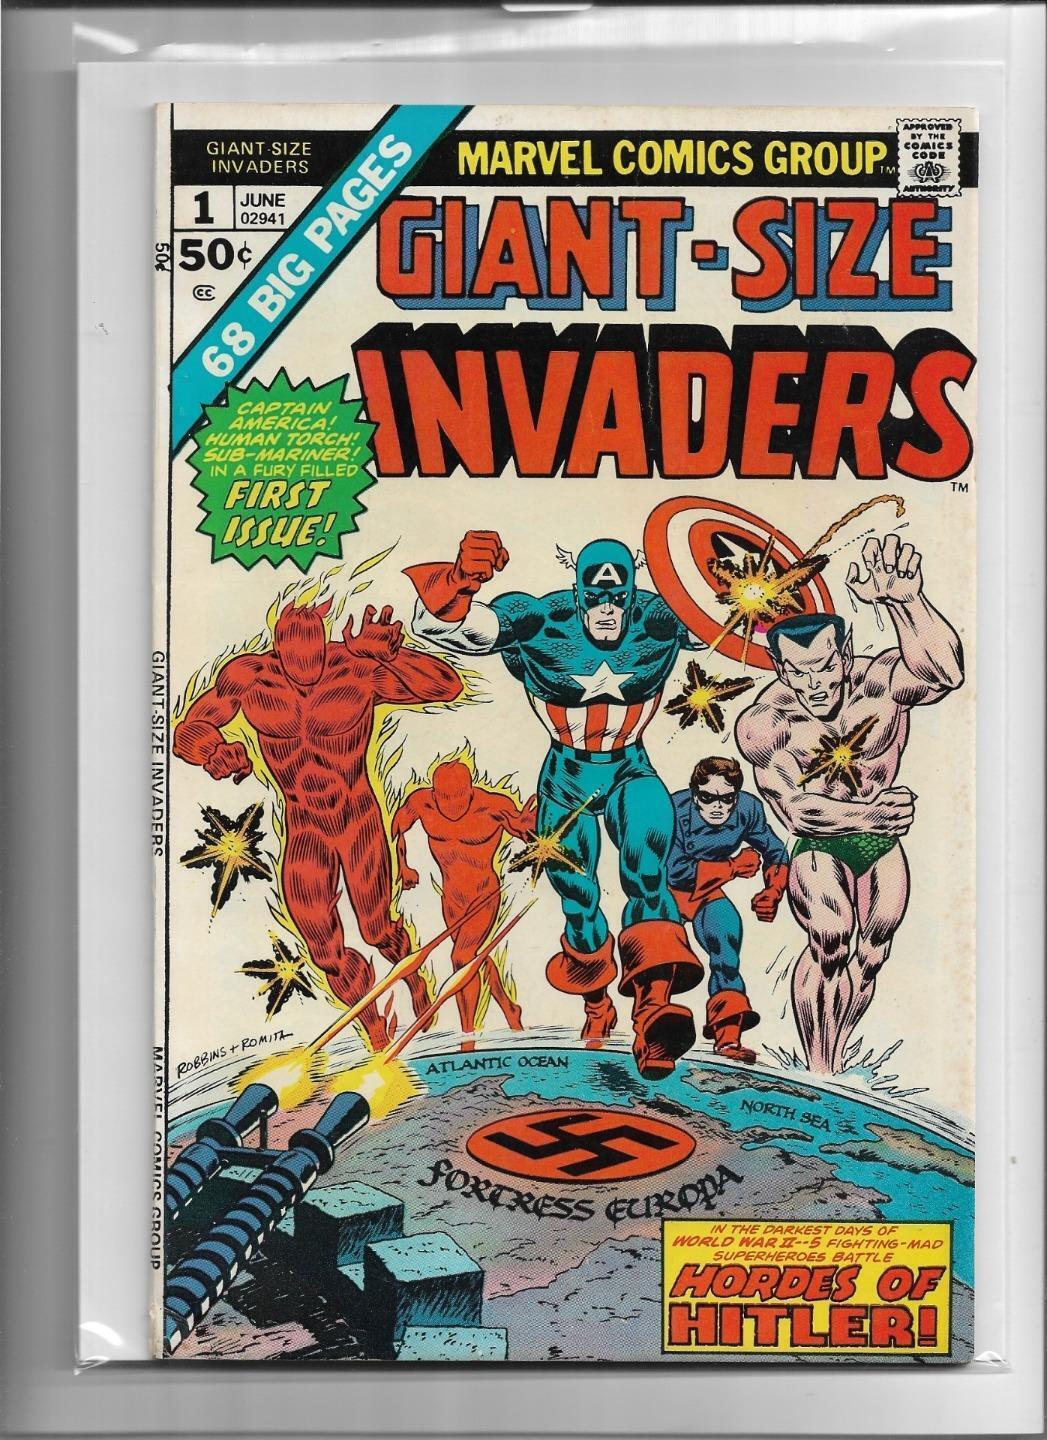 GIANT-SIZE INVADERS #1 1975 VERY FINE- 7.5 4329 CAPTAIN AMERICA SUB-MARINER